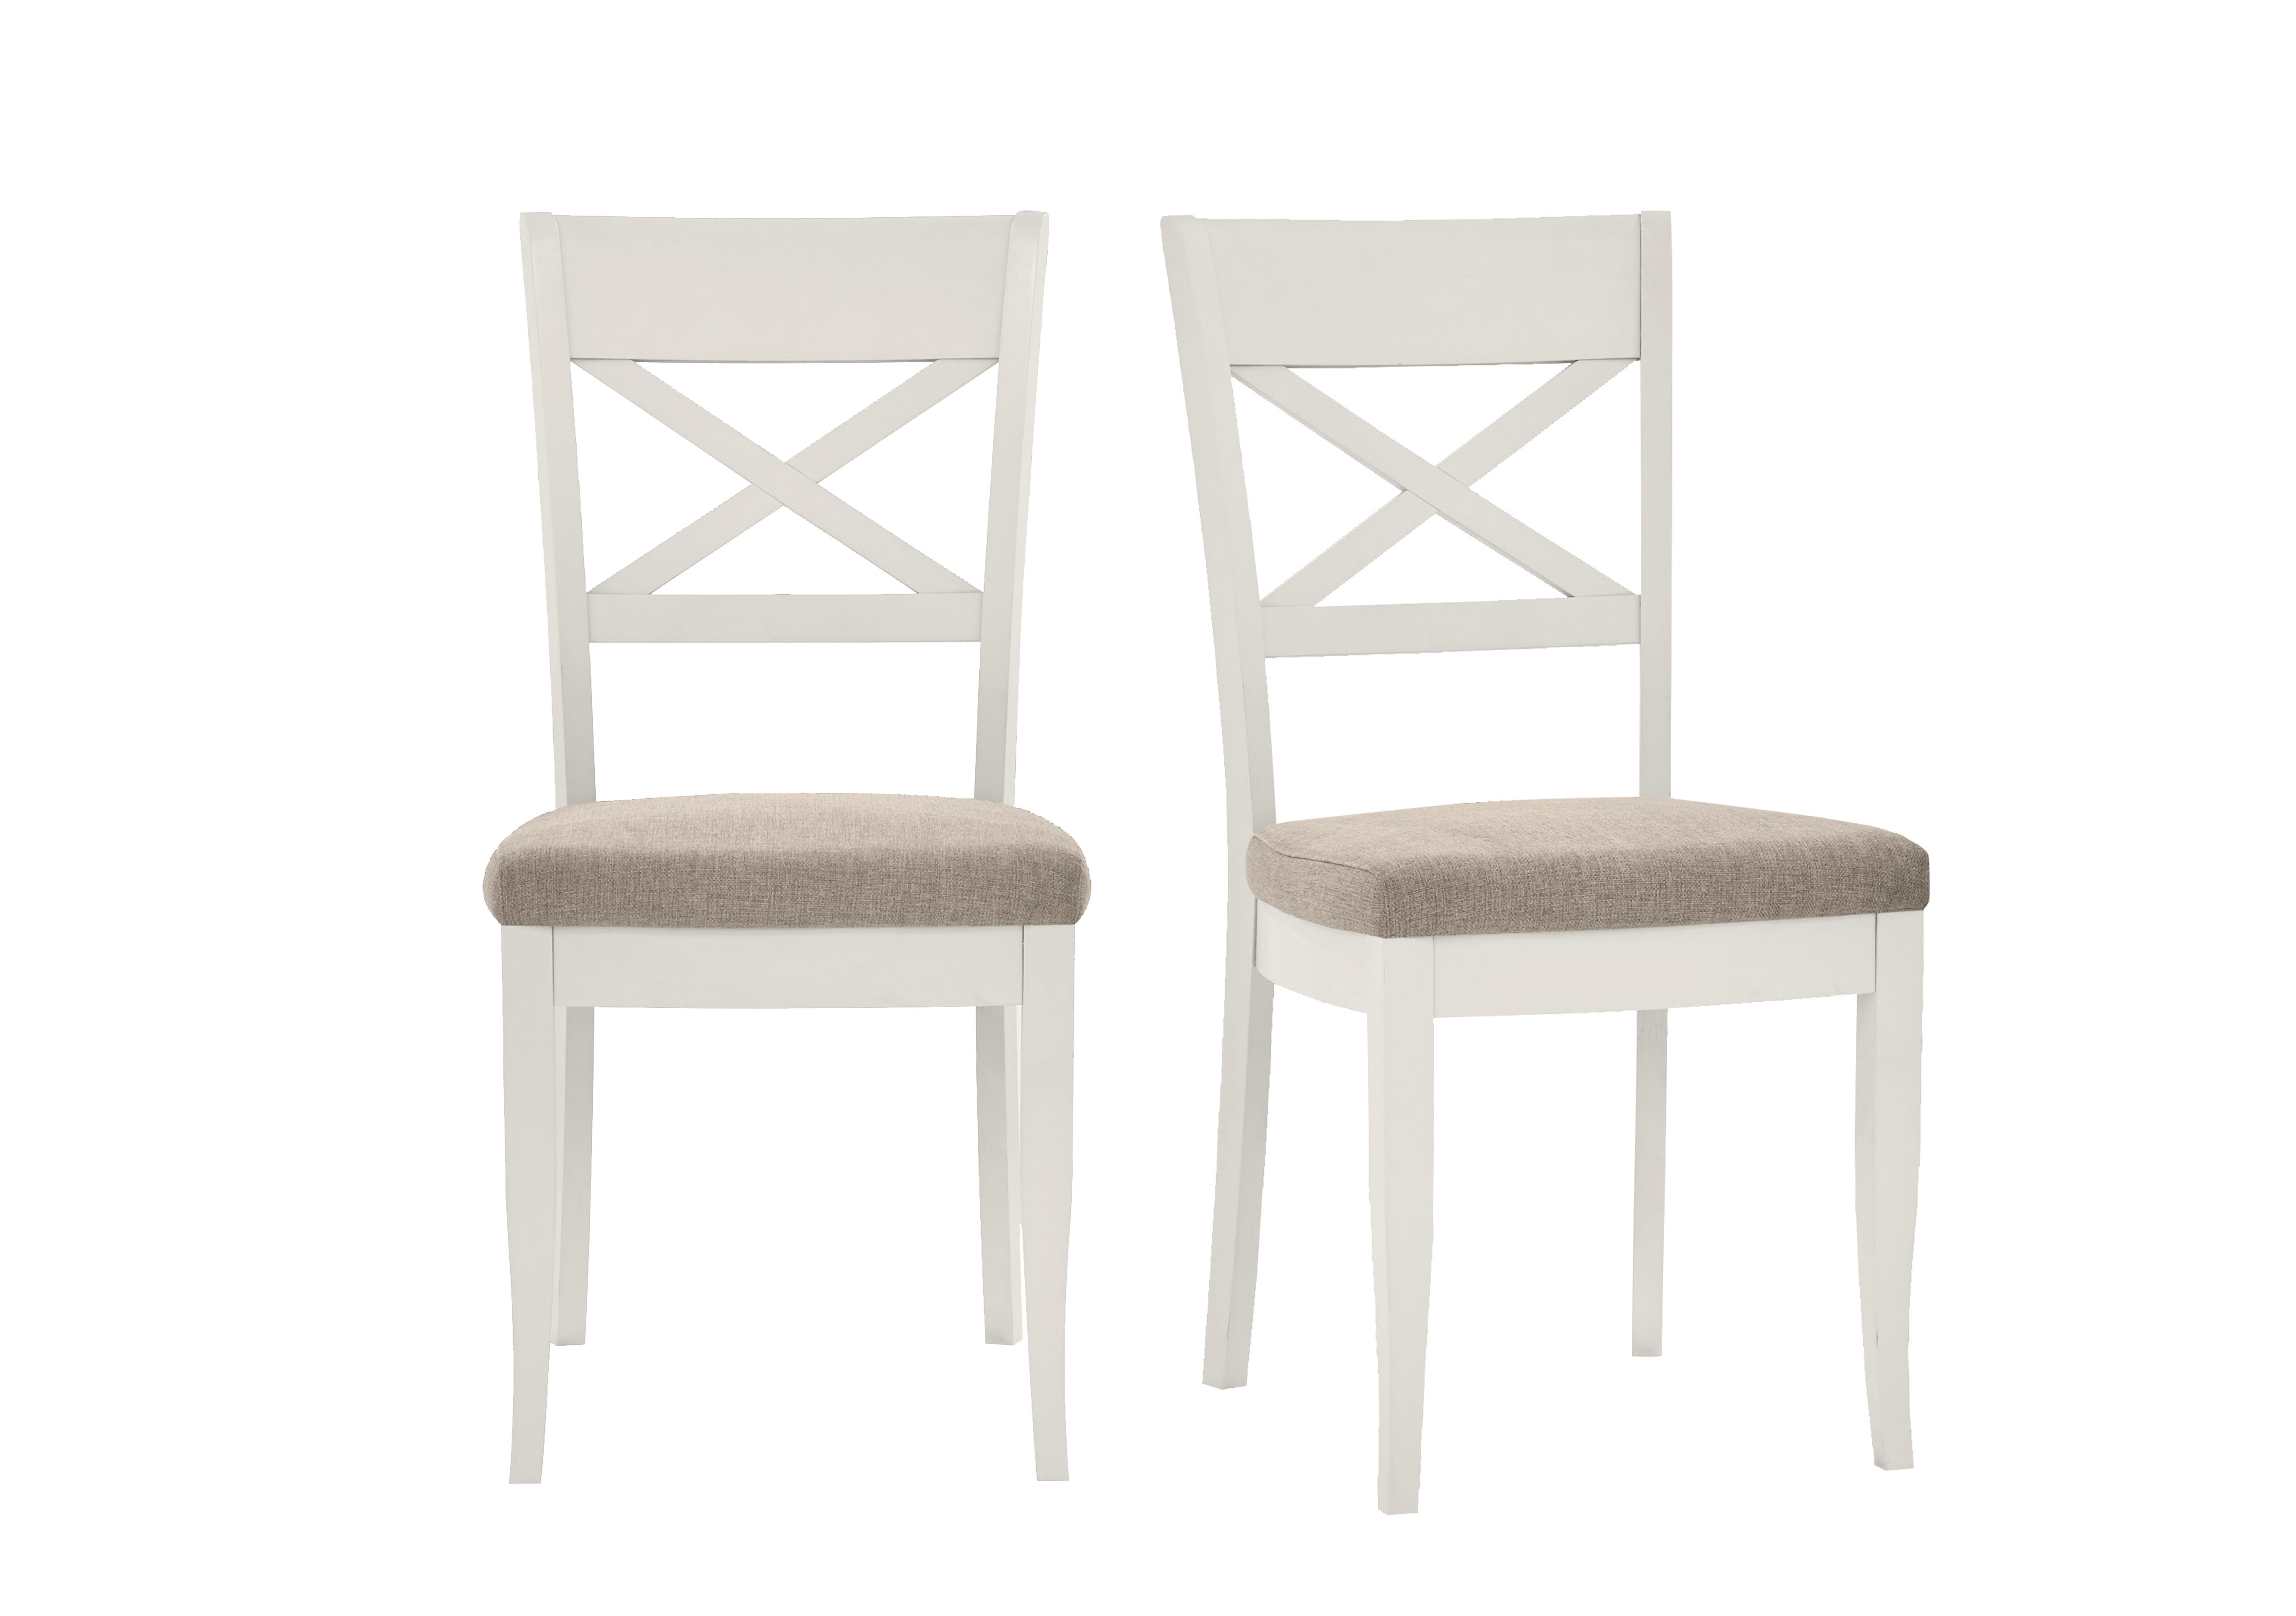 Annecy Pair of Cross Back Fabric Dining Chairs in Pebble Grey on Furniture Village